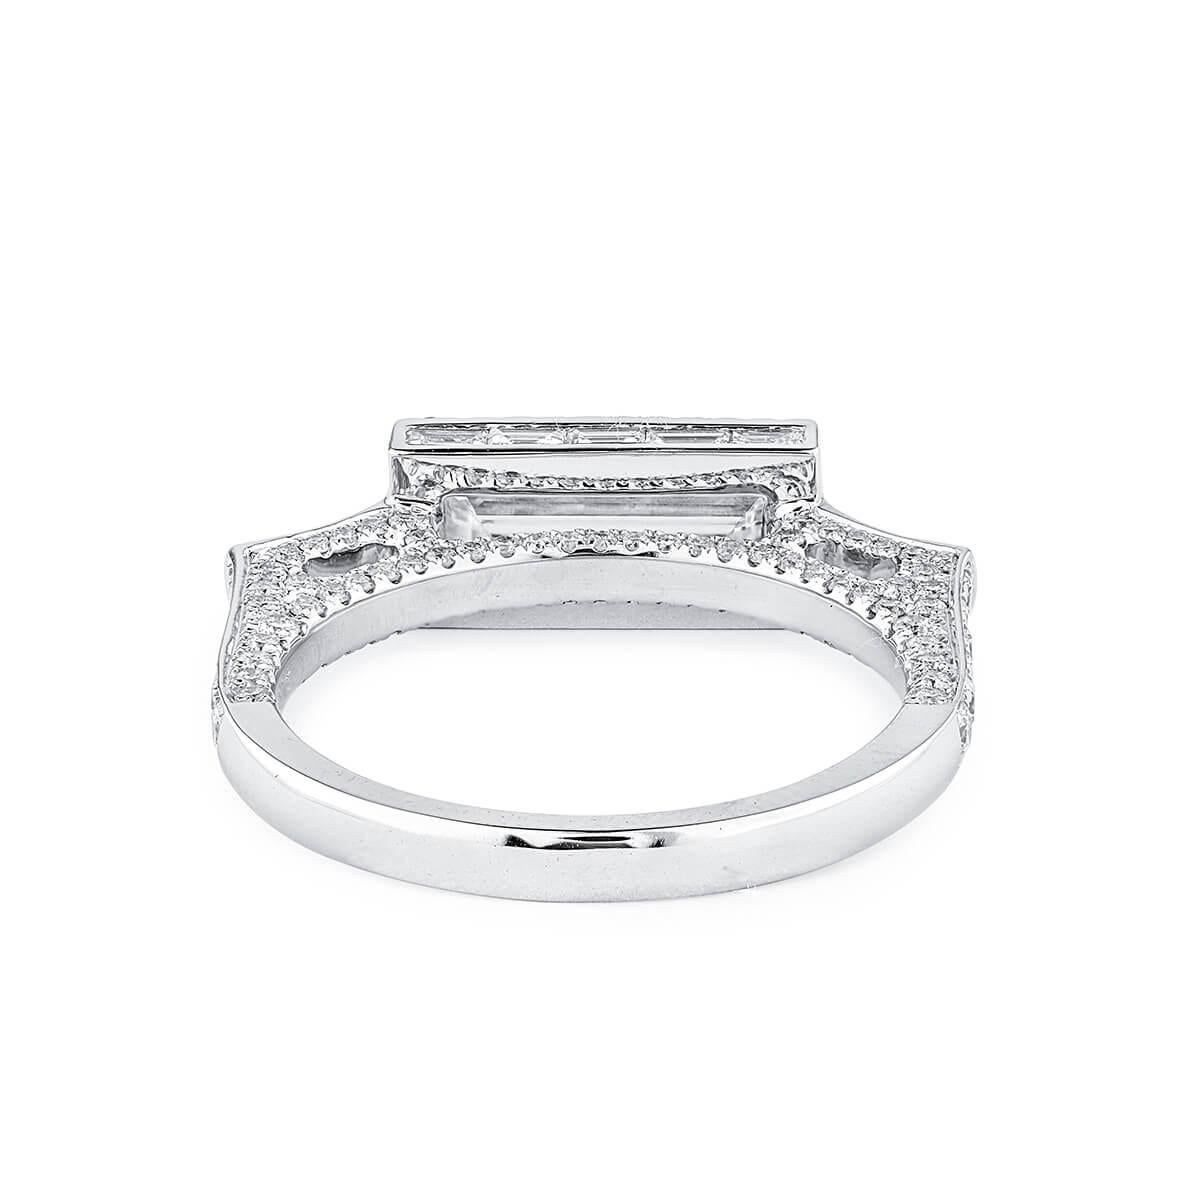 This contemporary piece consists of one 0.80 Carat Baguette Shape main white diamond and is complimented by surrounding smaller natural white diamonds making up a total of 1.73 Carats. This piece has been expertly crafted using 18 Karat White Gold.